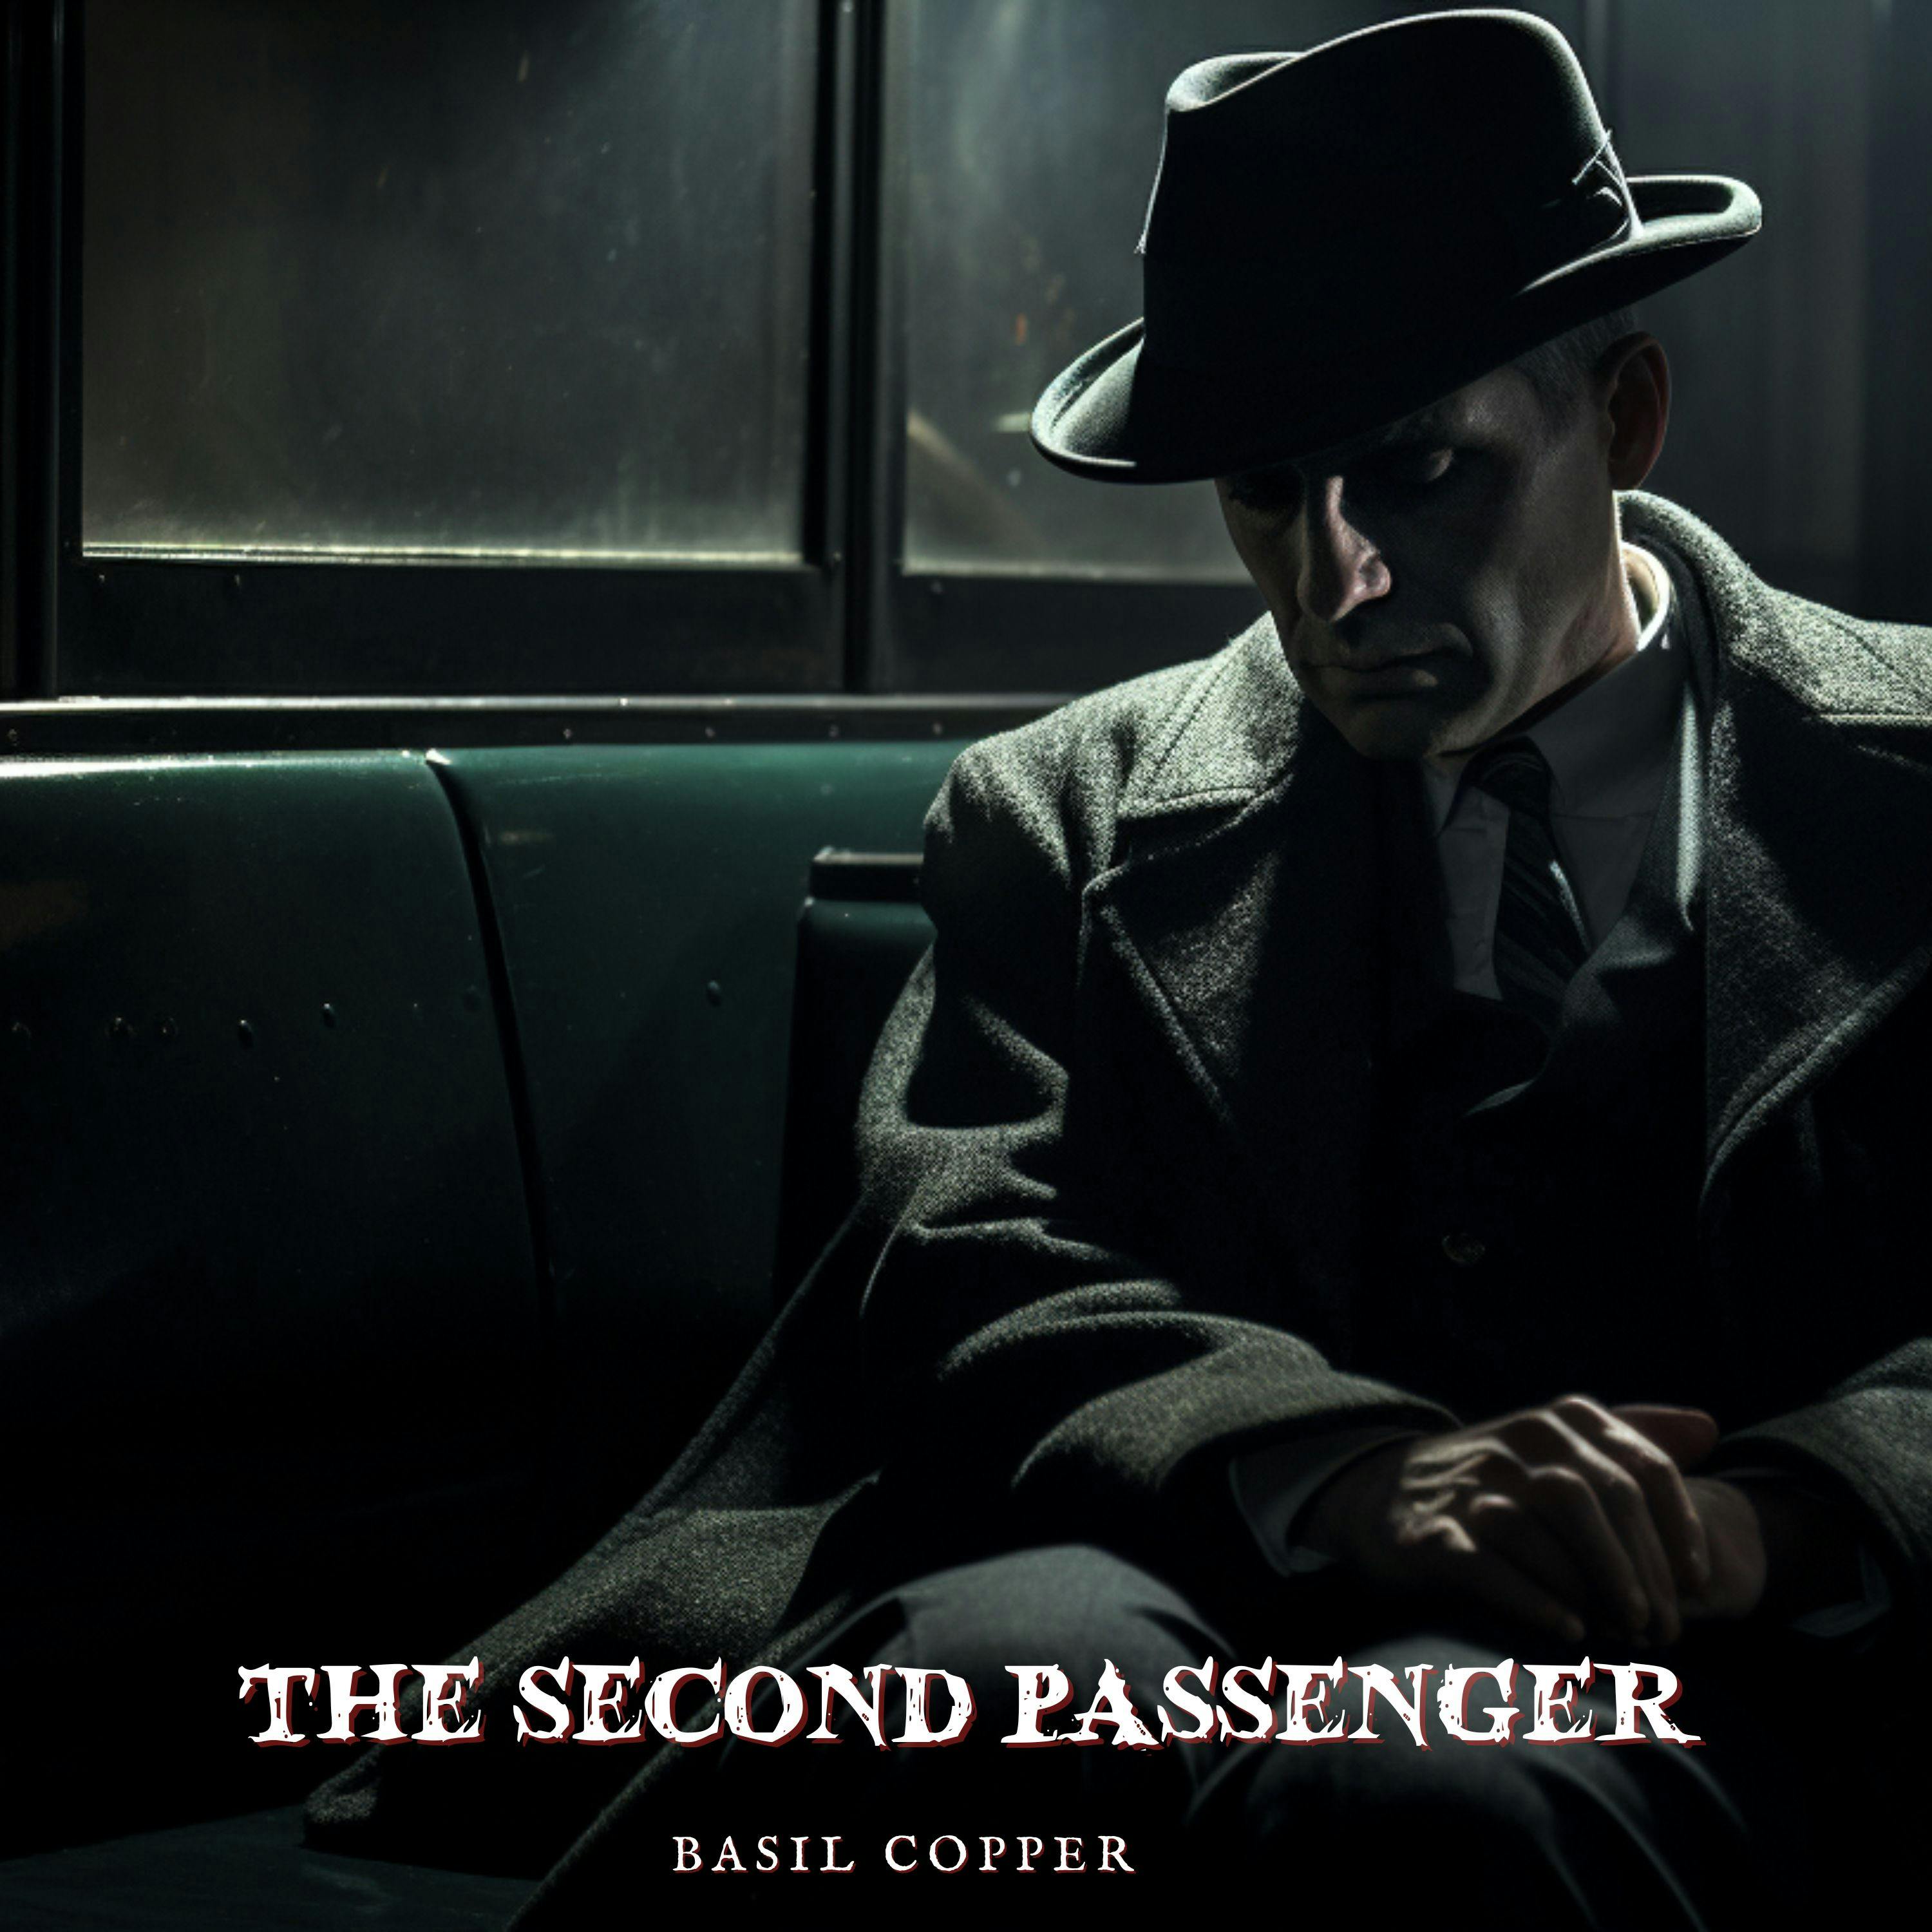 The Second Passenger by Basil Copper